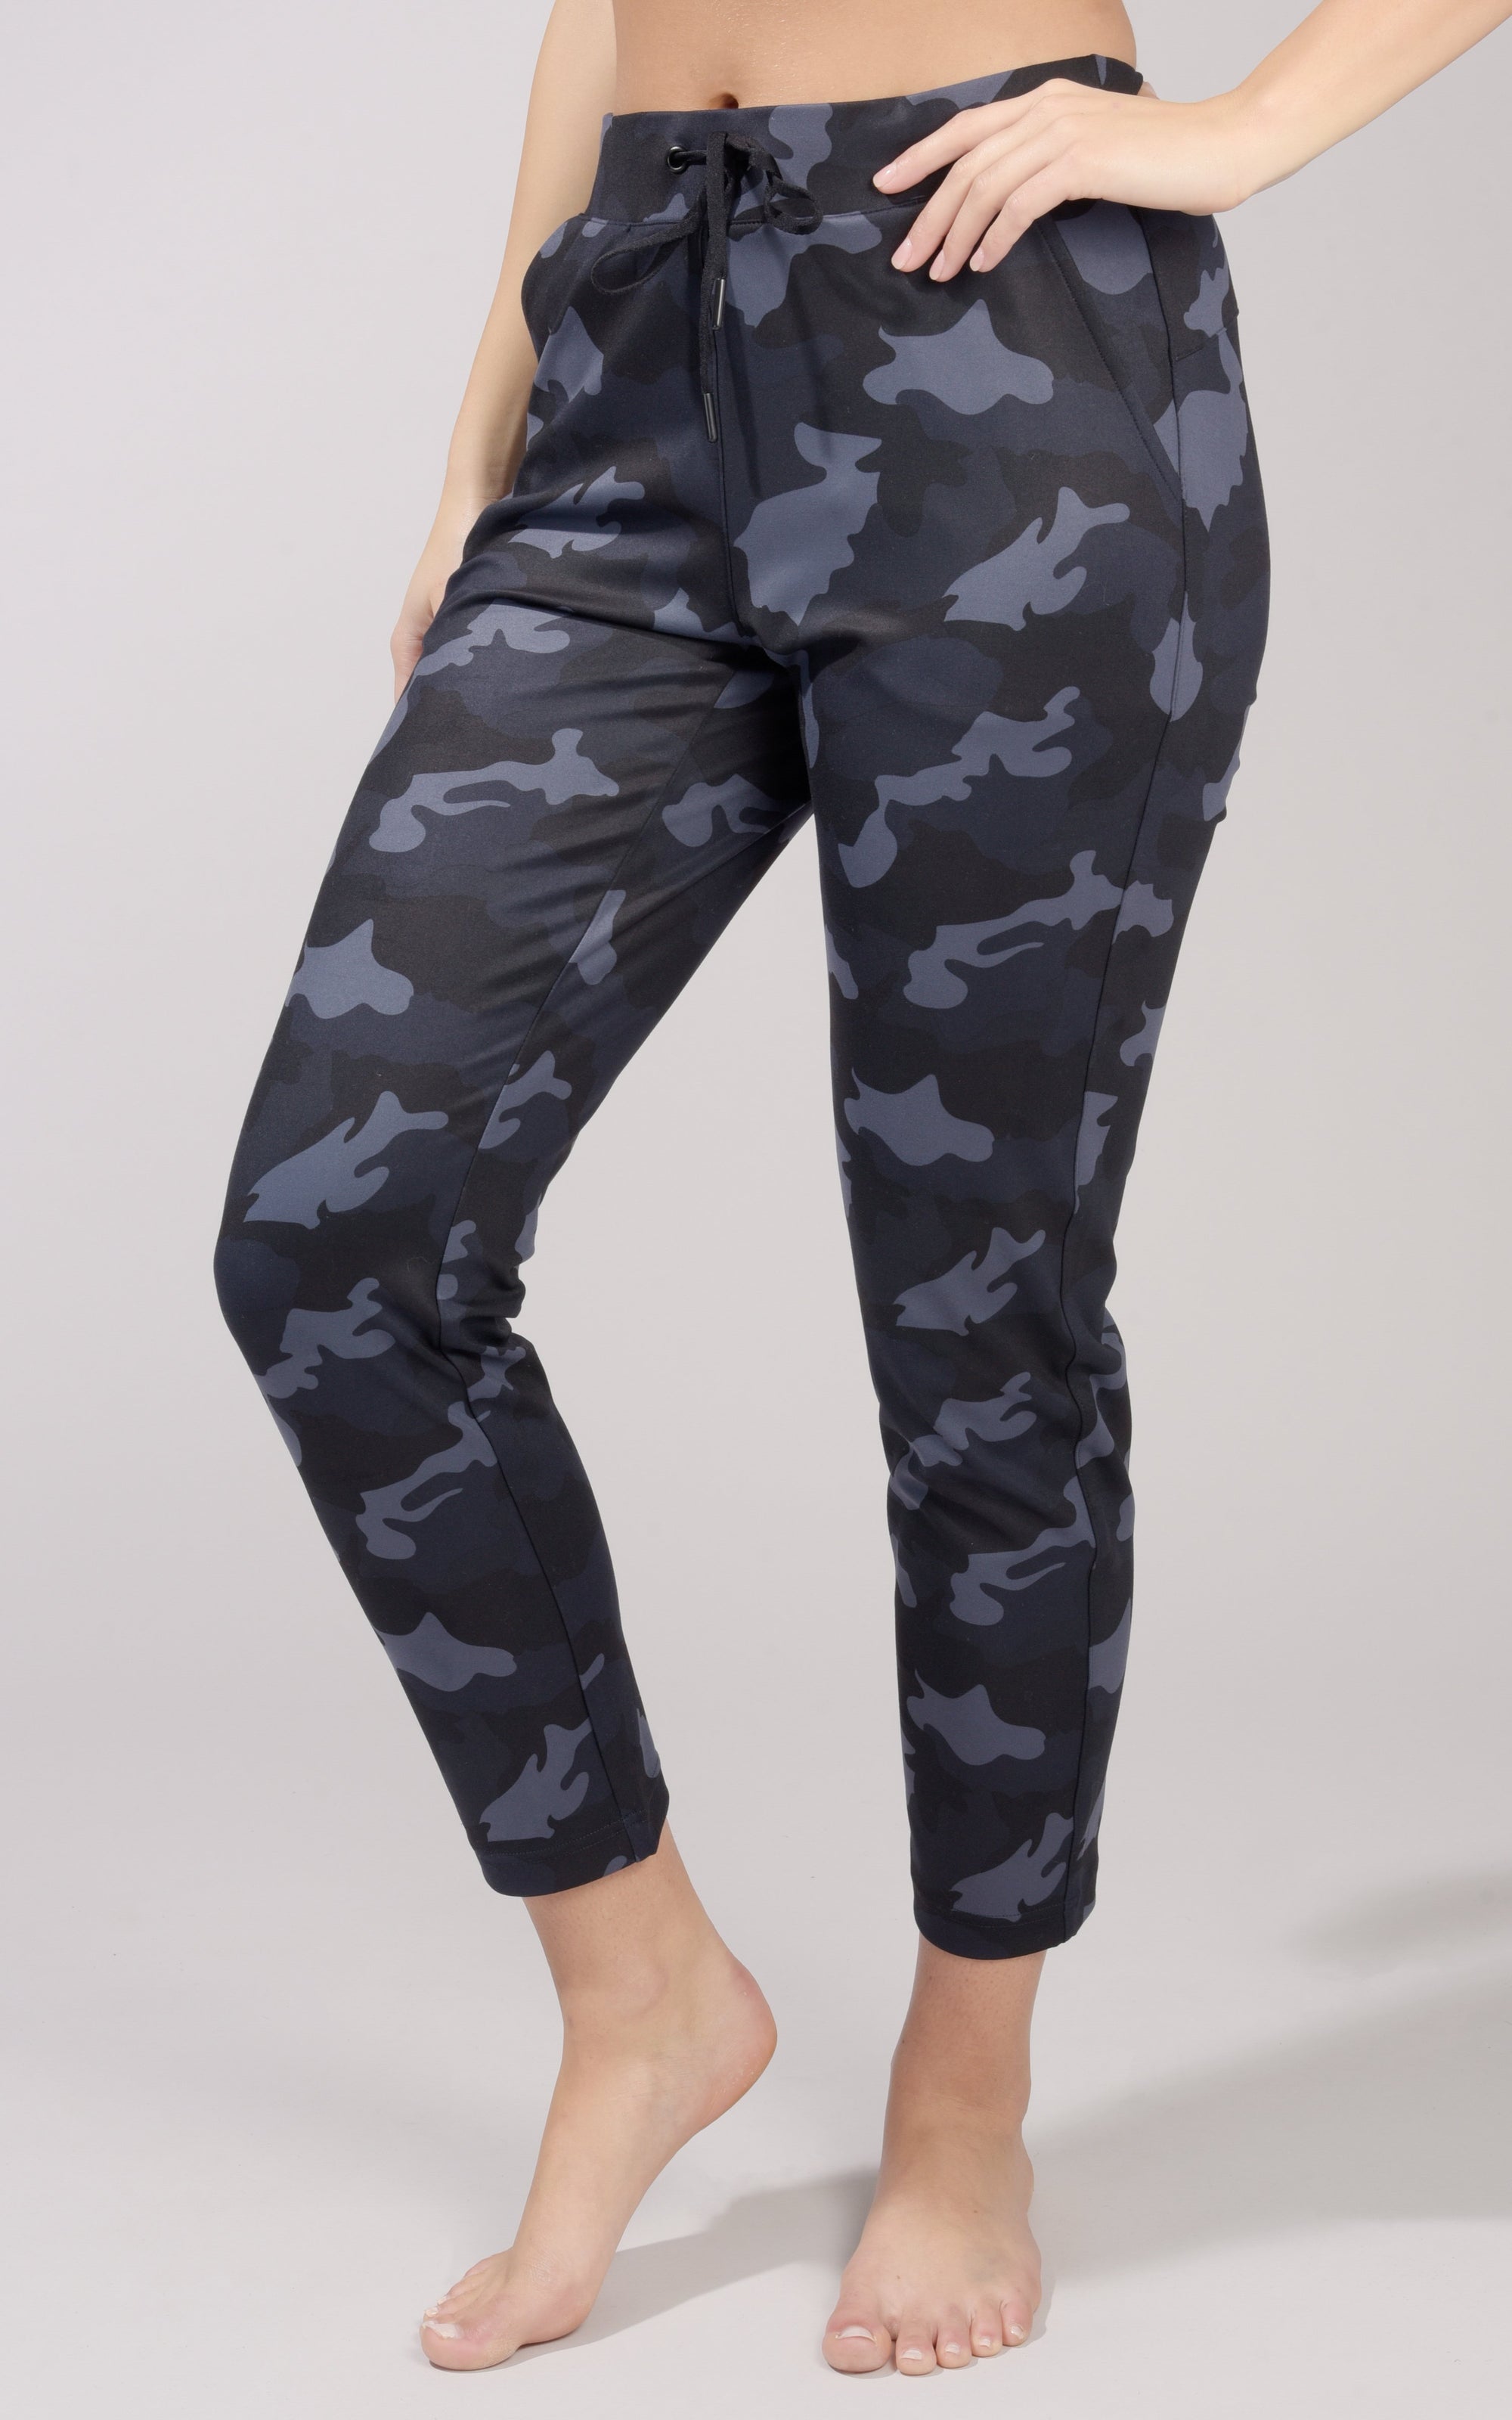 Top FashionTrends - 90 Degree By Reflex – Yogalicious Lux Camo